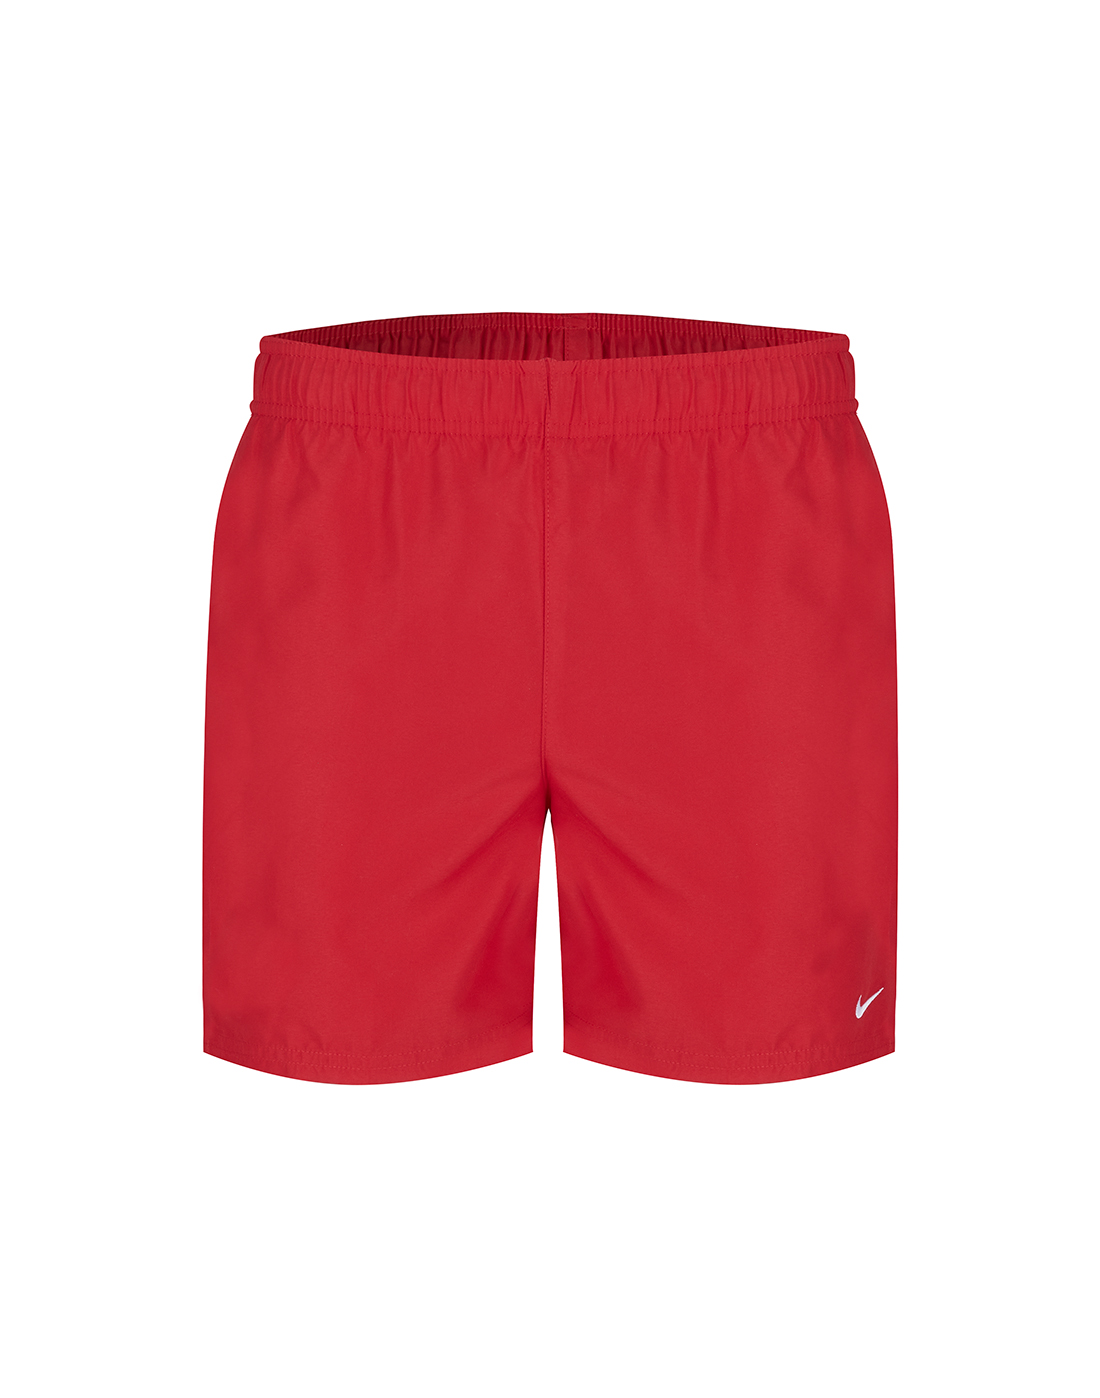 Nike Mens Swim Short 5Inch - Red | Life Style Sports IE